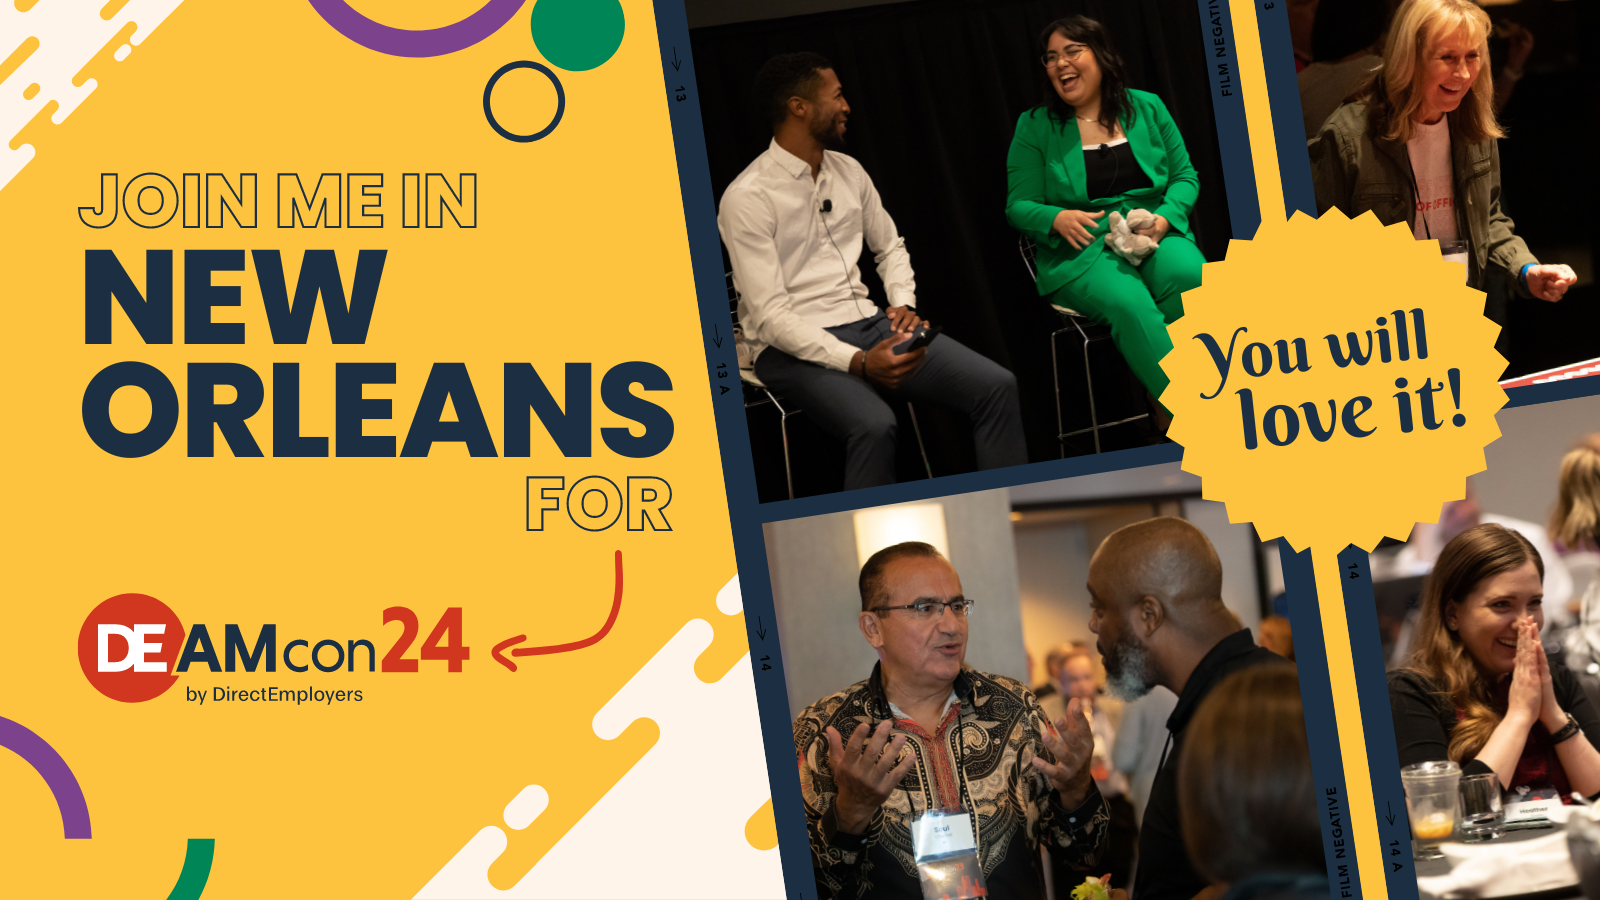 Join me in New Orleans for DEAMcon24